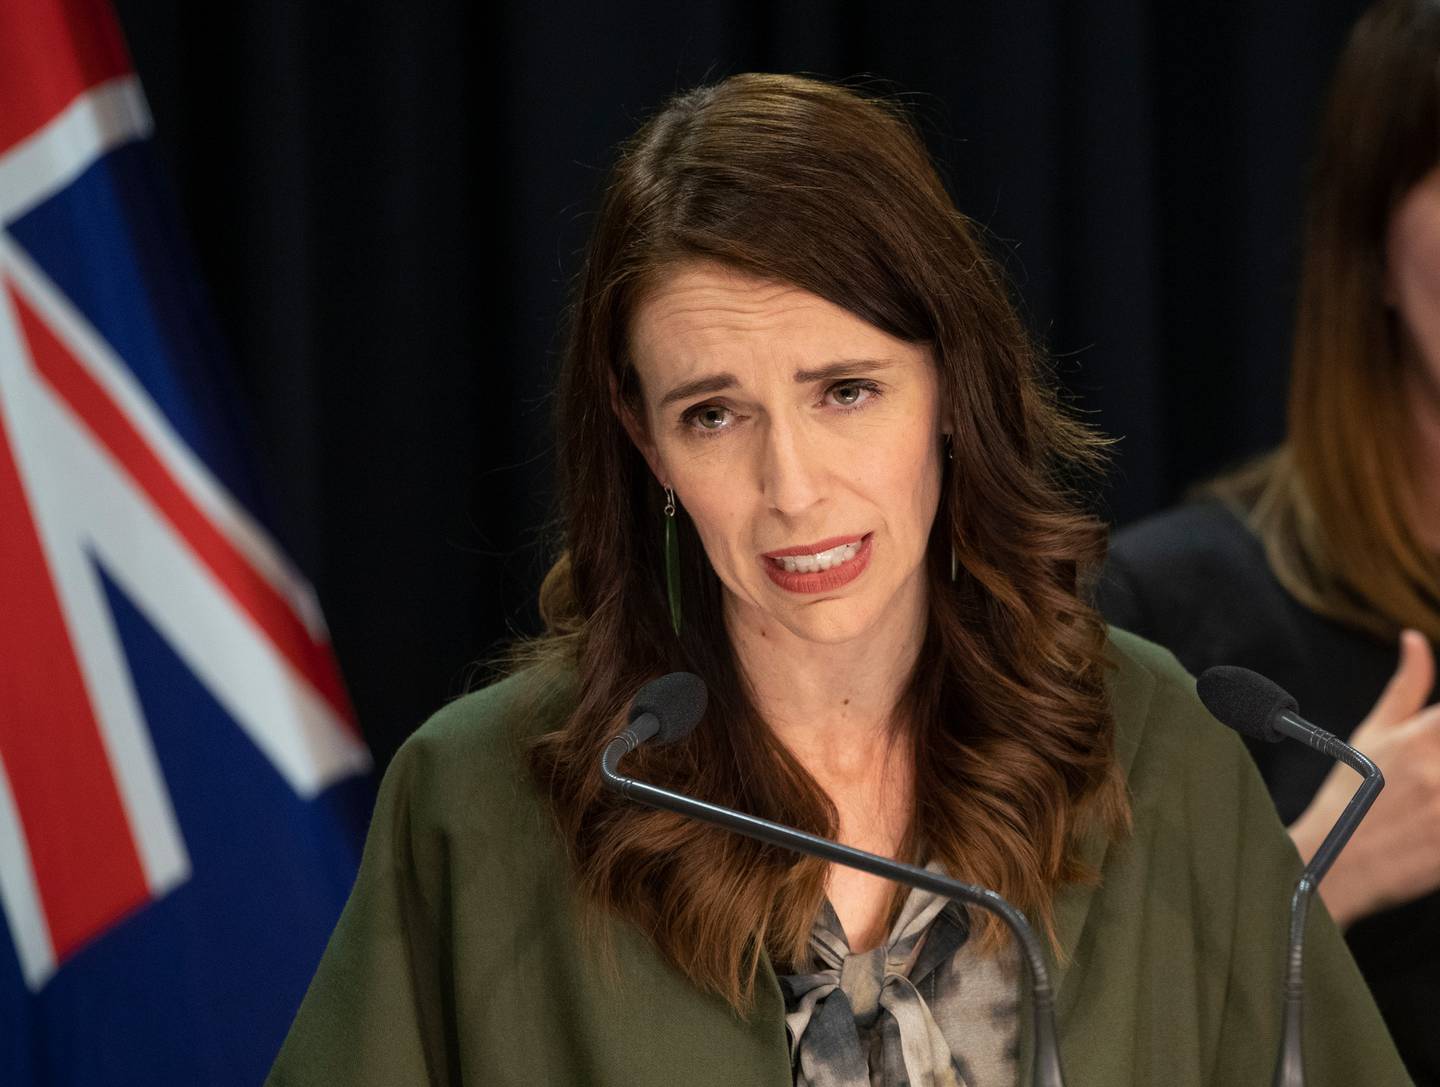 Prime Minister Jacinda Ardern said she wanted a climate change emergency declared last term. Photo / Mark Mitchell